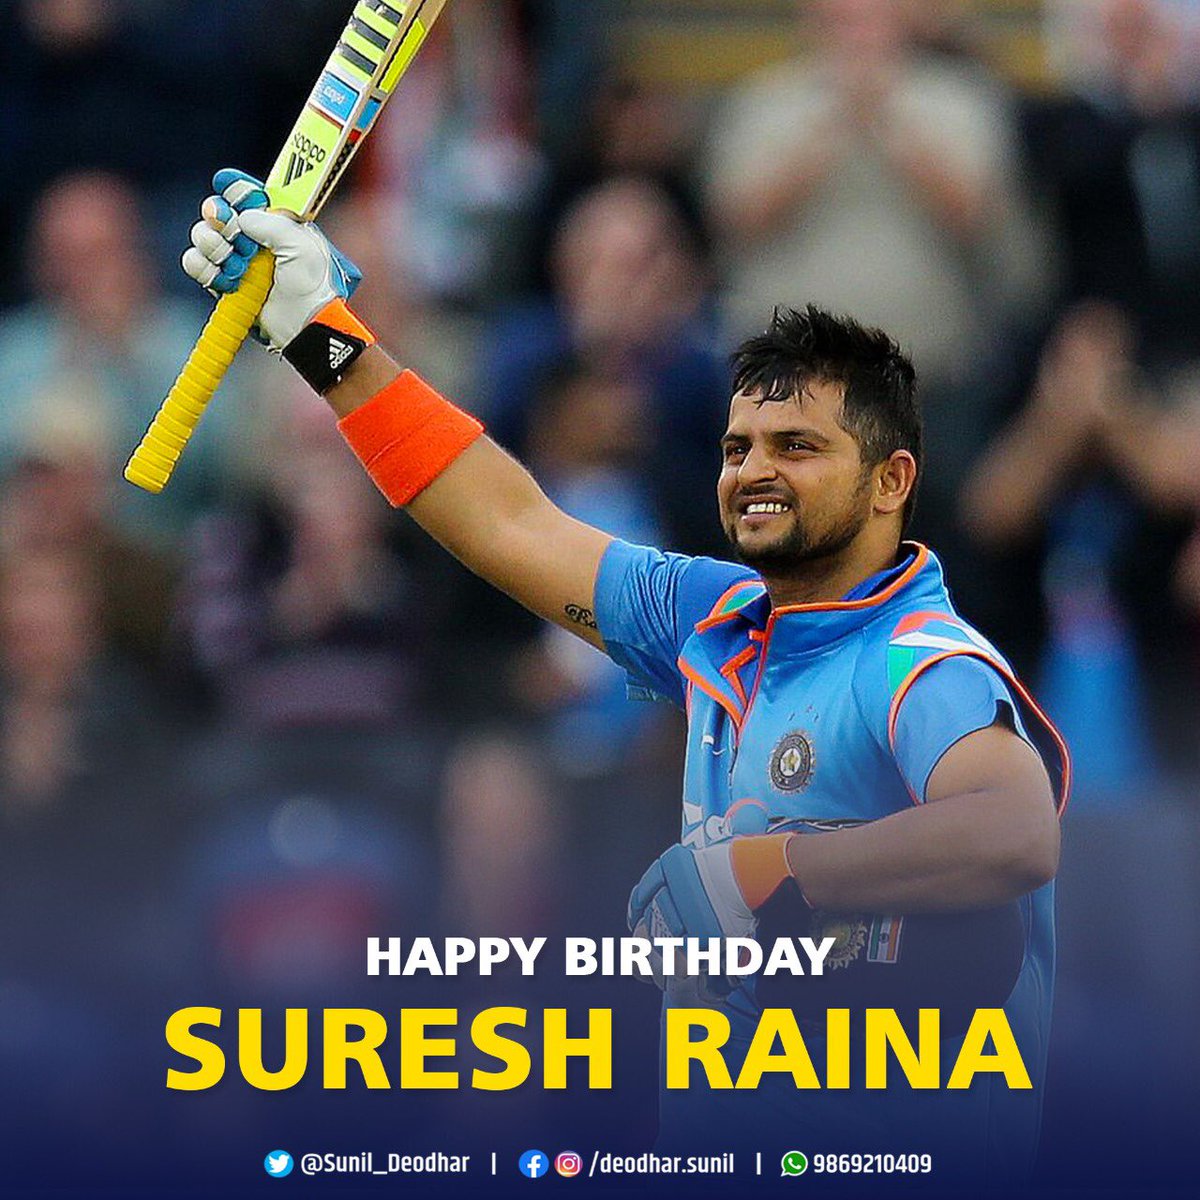 Wishing former Indian Cricketer @ImRaina a very Happy Birthday! A cricketer par excellence, he had a unique style and his contributions to the Indian Cricket Team in bringing laurels to the Country are commendable. #SureshRaina